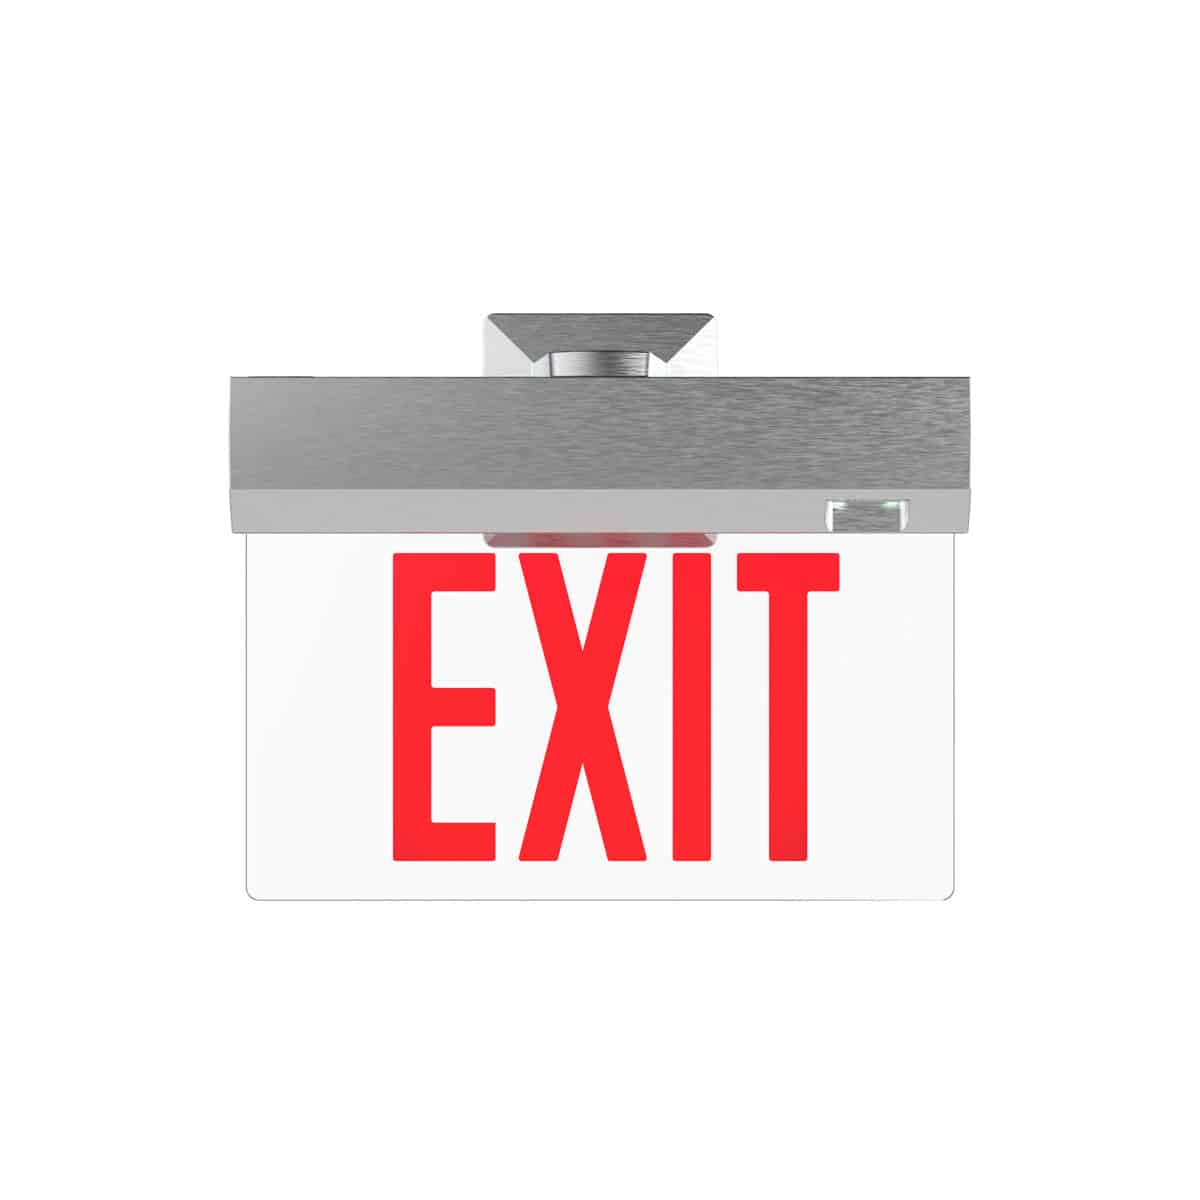 The ELT2-BACK-MOUNT-BRUSHED-ALUMINUM Elite Edge-Lit Exit Sign is a maintenance-free LED Light source with 25+ years life expectancy.